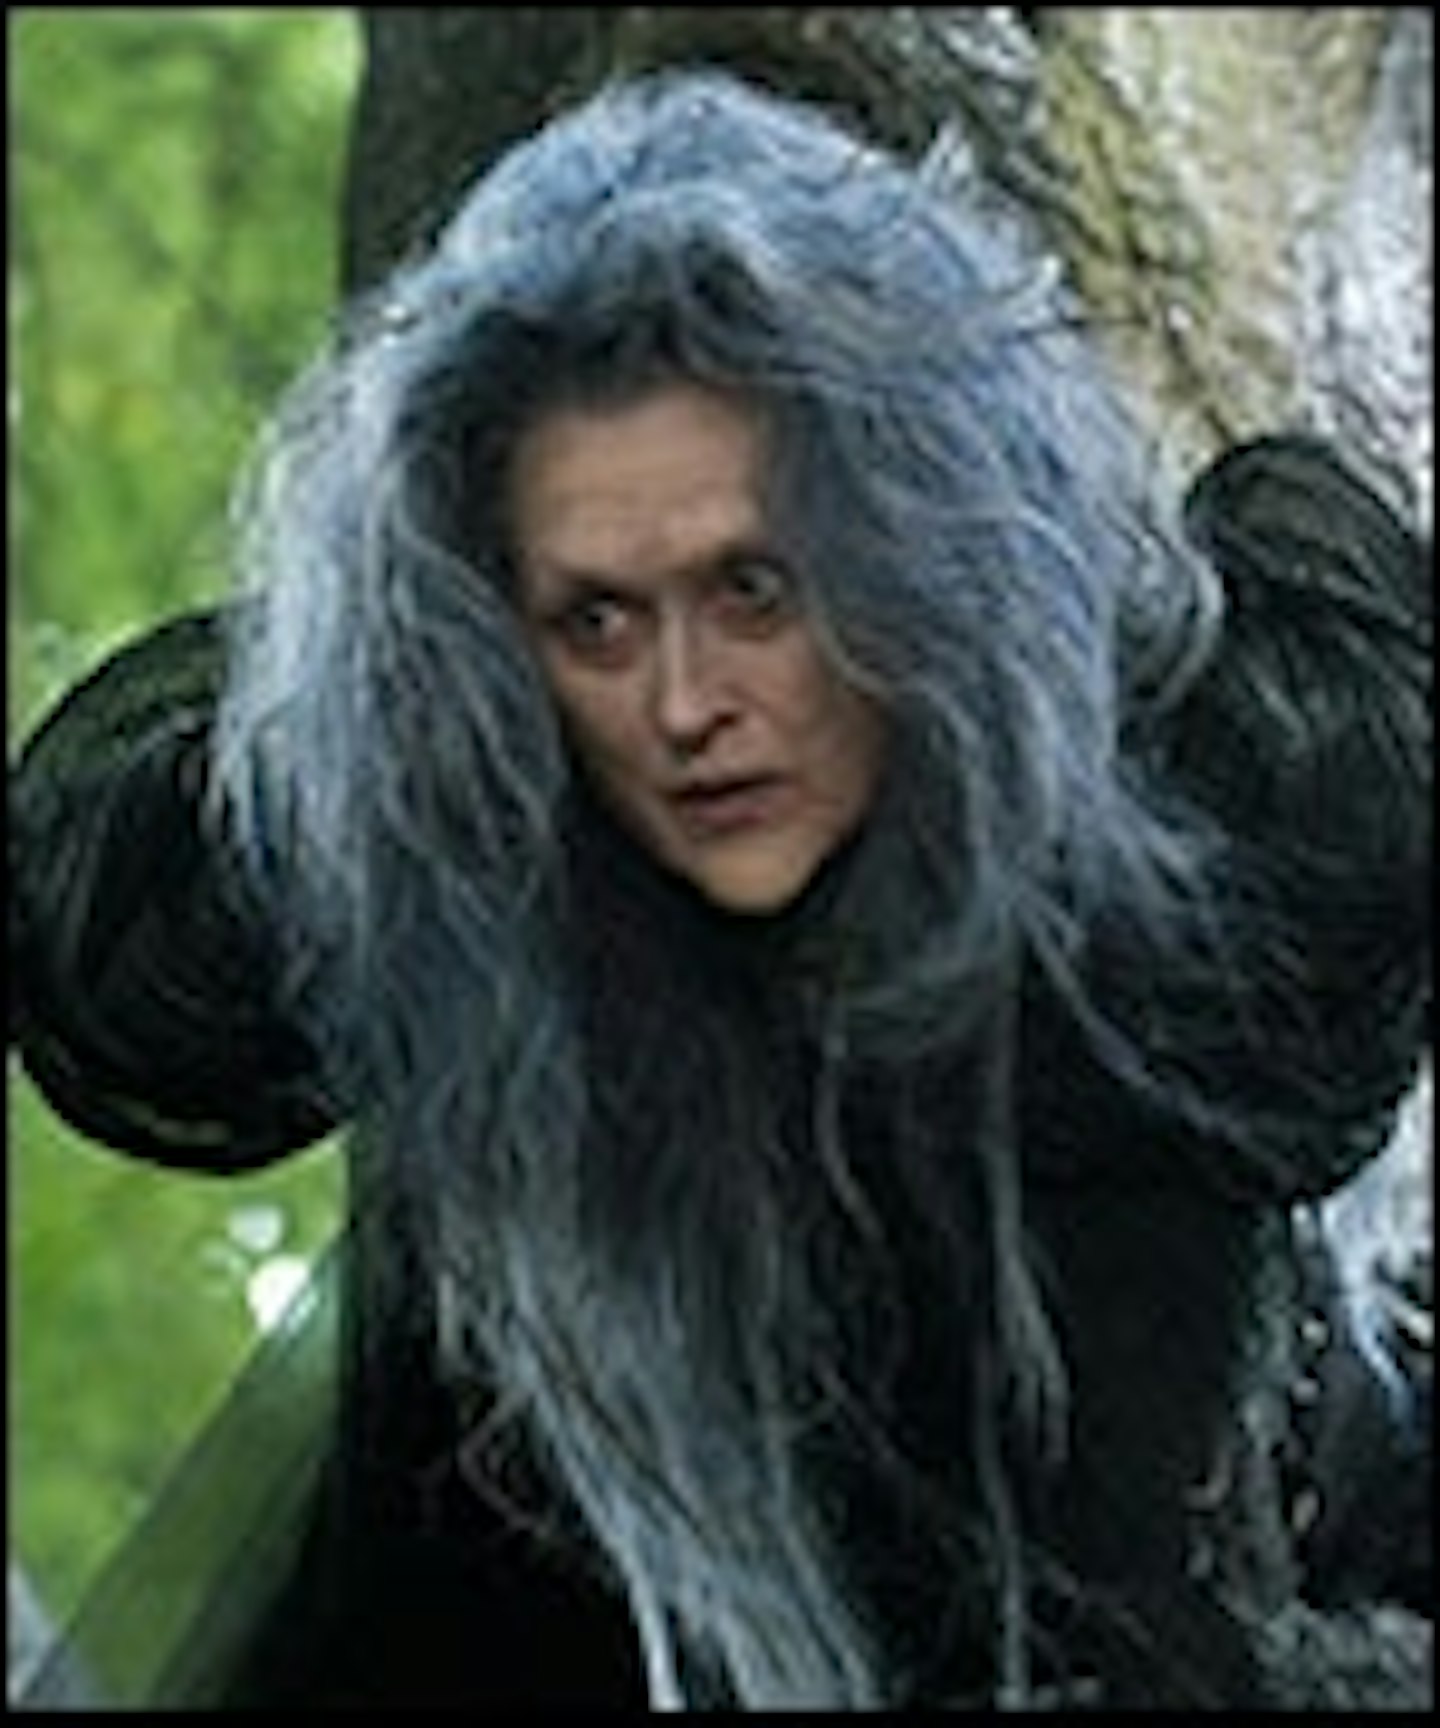 First Look At Meryl Streep's Wicked Witch